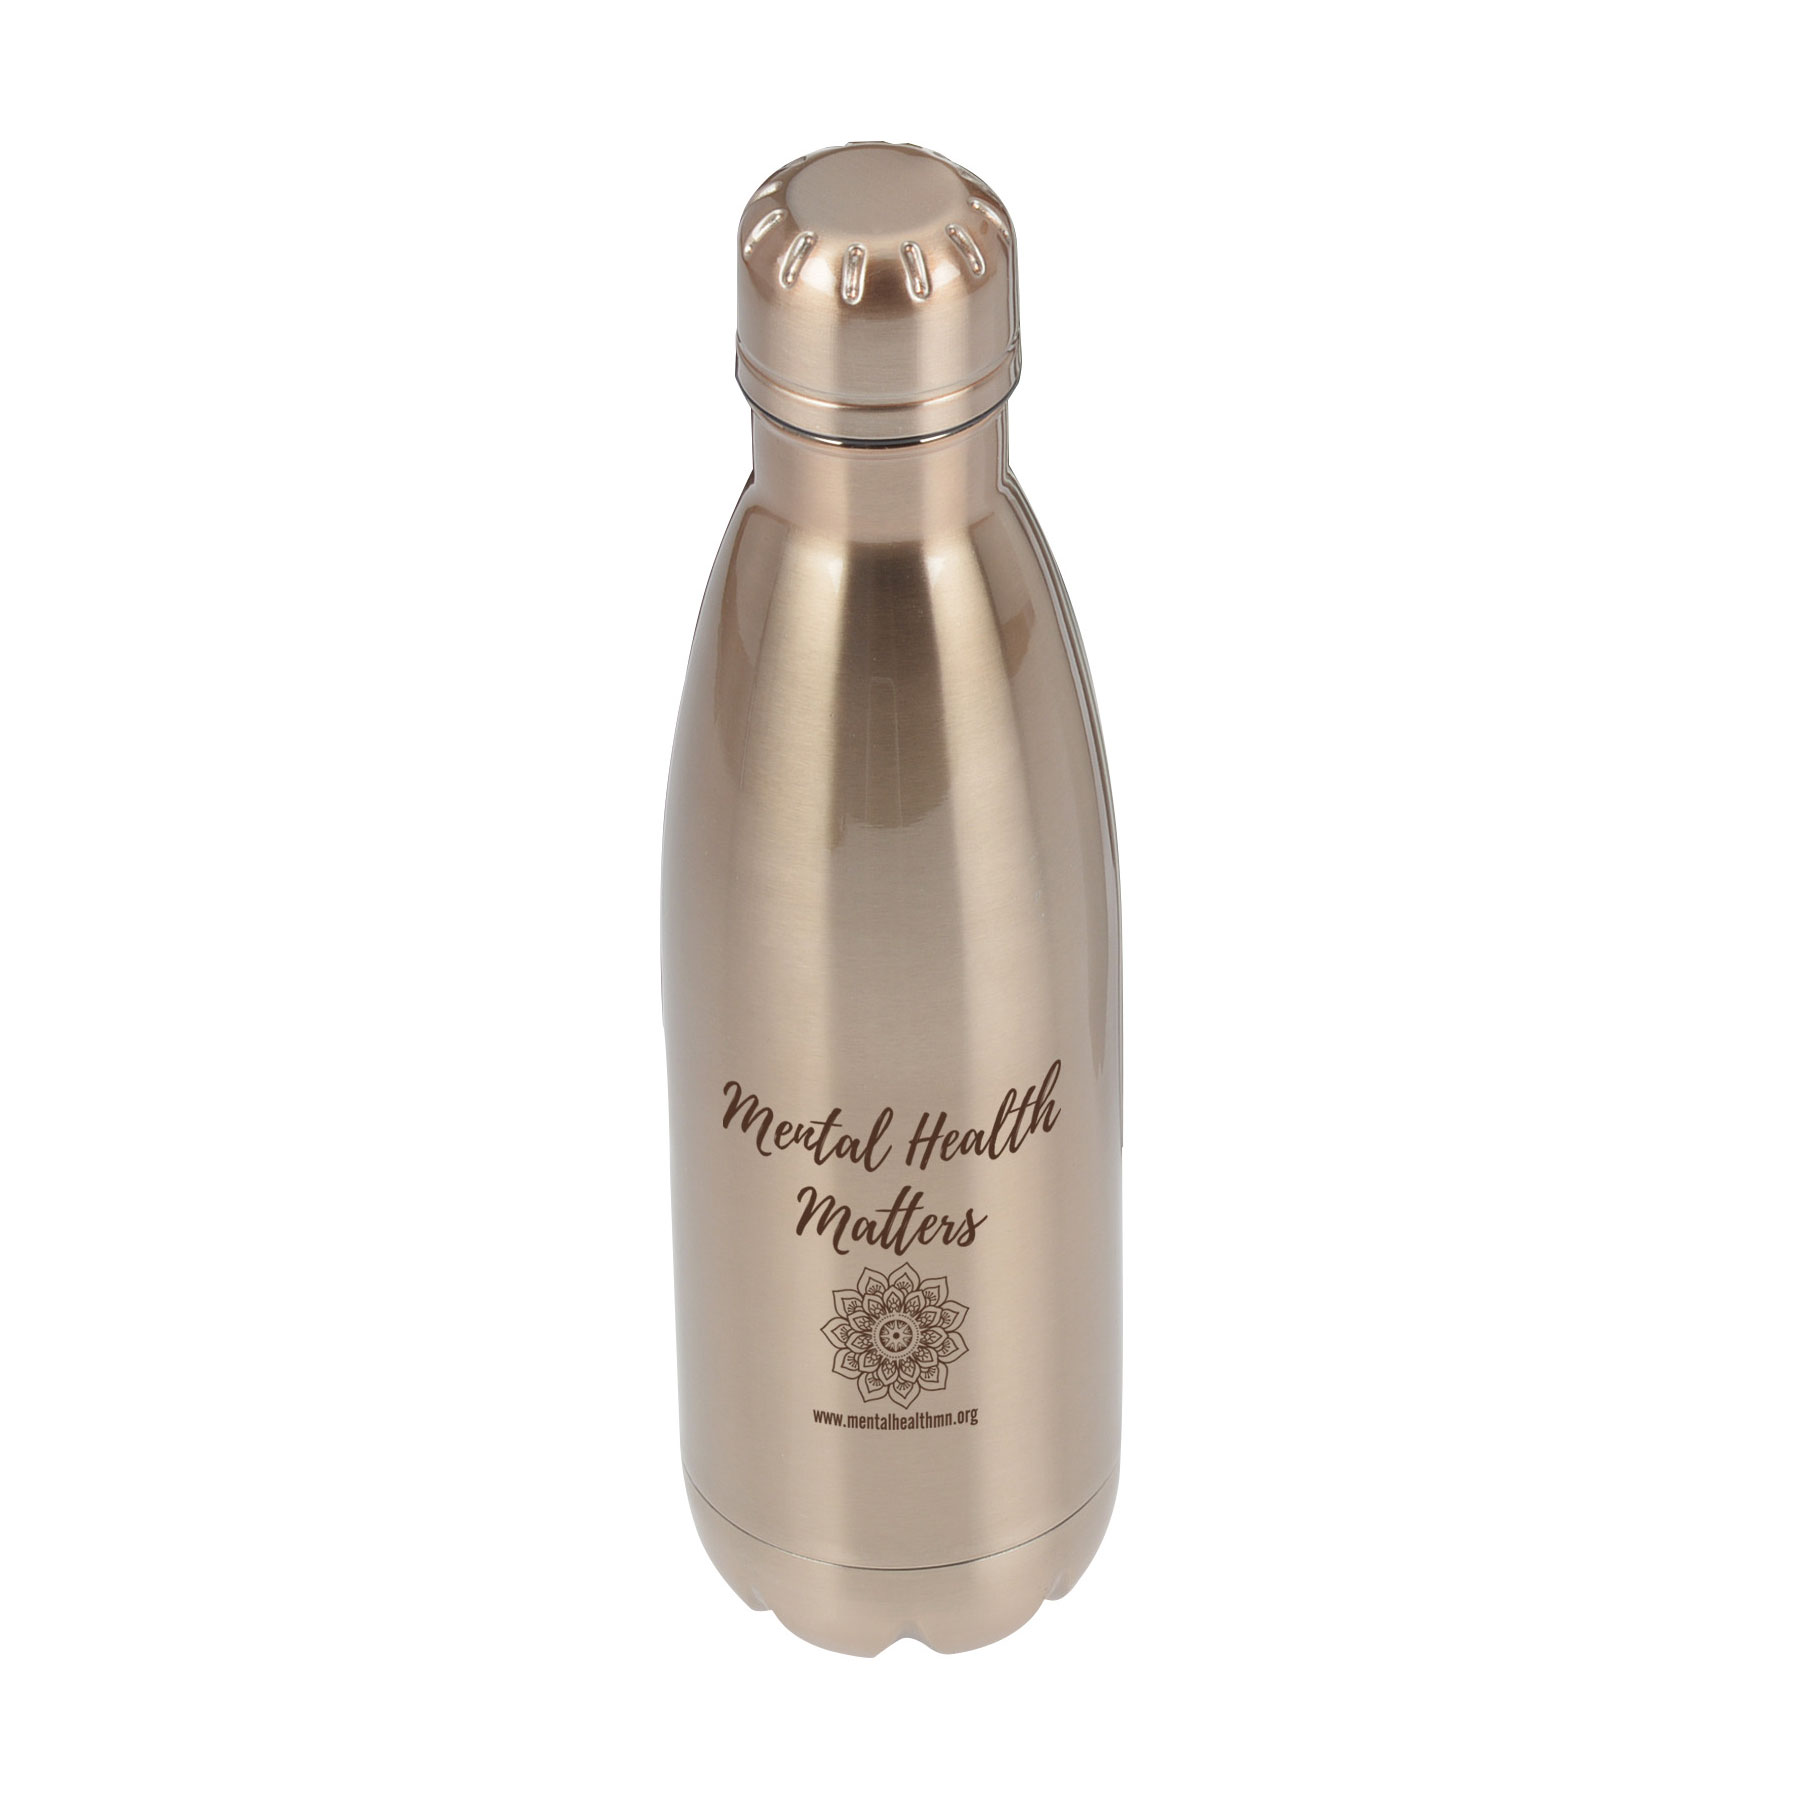 Marketing Embark Vacuum Insulated Water Bottles with Copper Lining